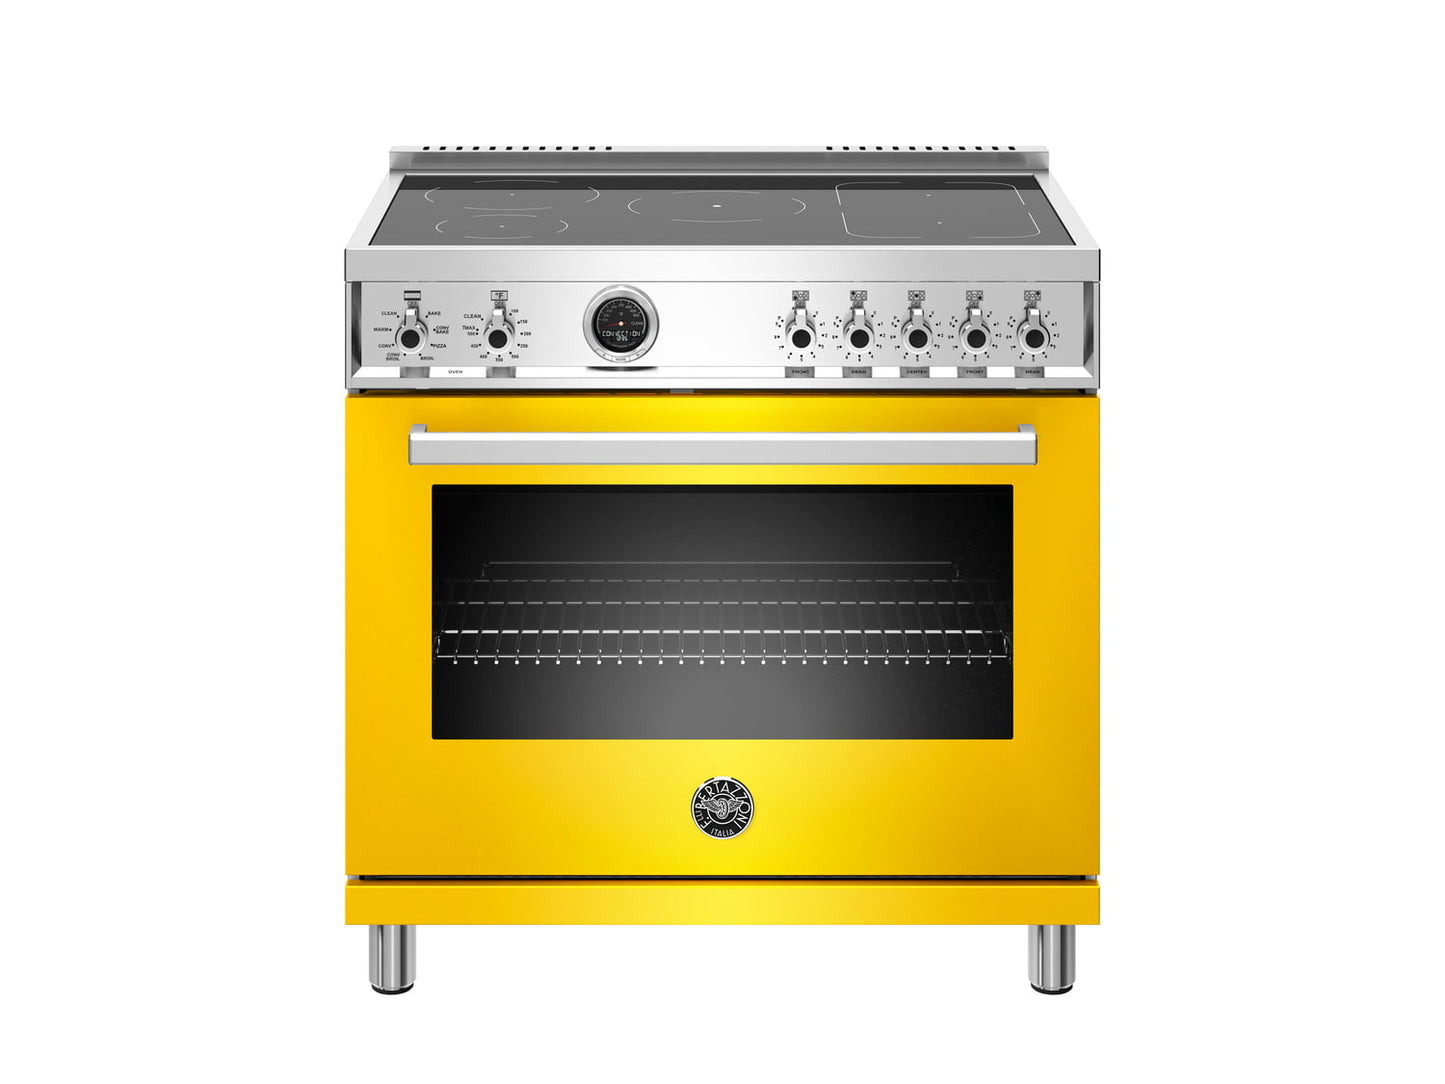 Bertazzoni PROF365INSGIT 36 Inch Induction Range, 5 Heating Zones, Electric Self-Clean Oven Giallo